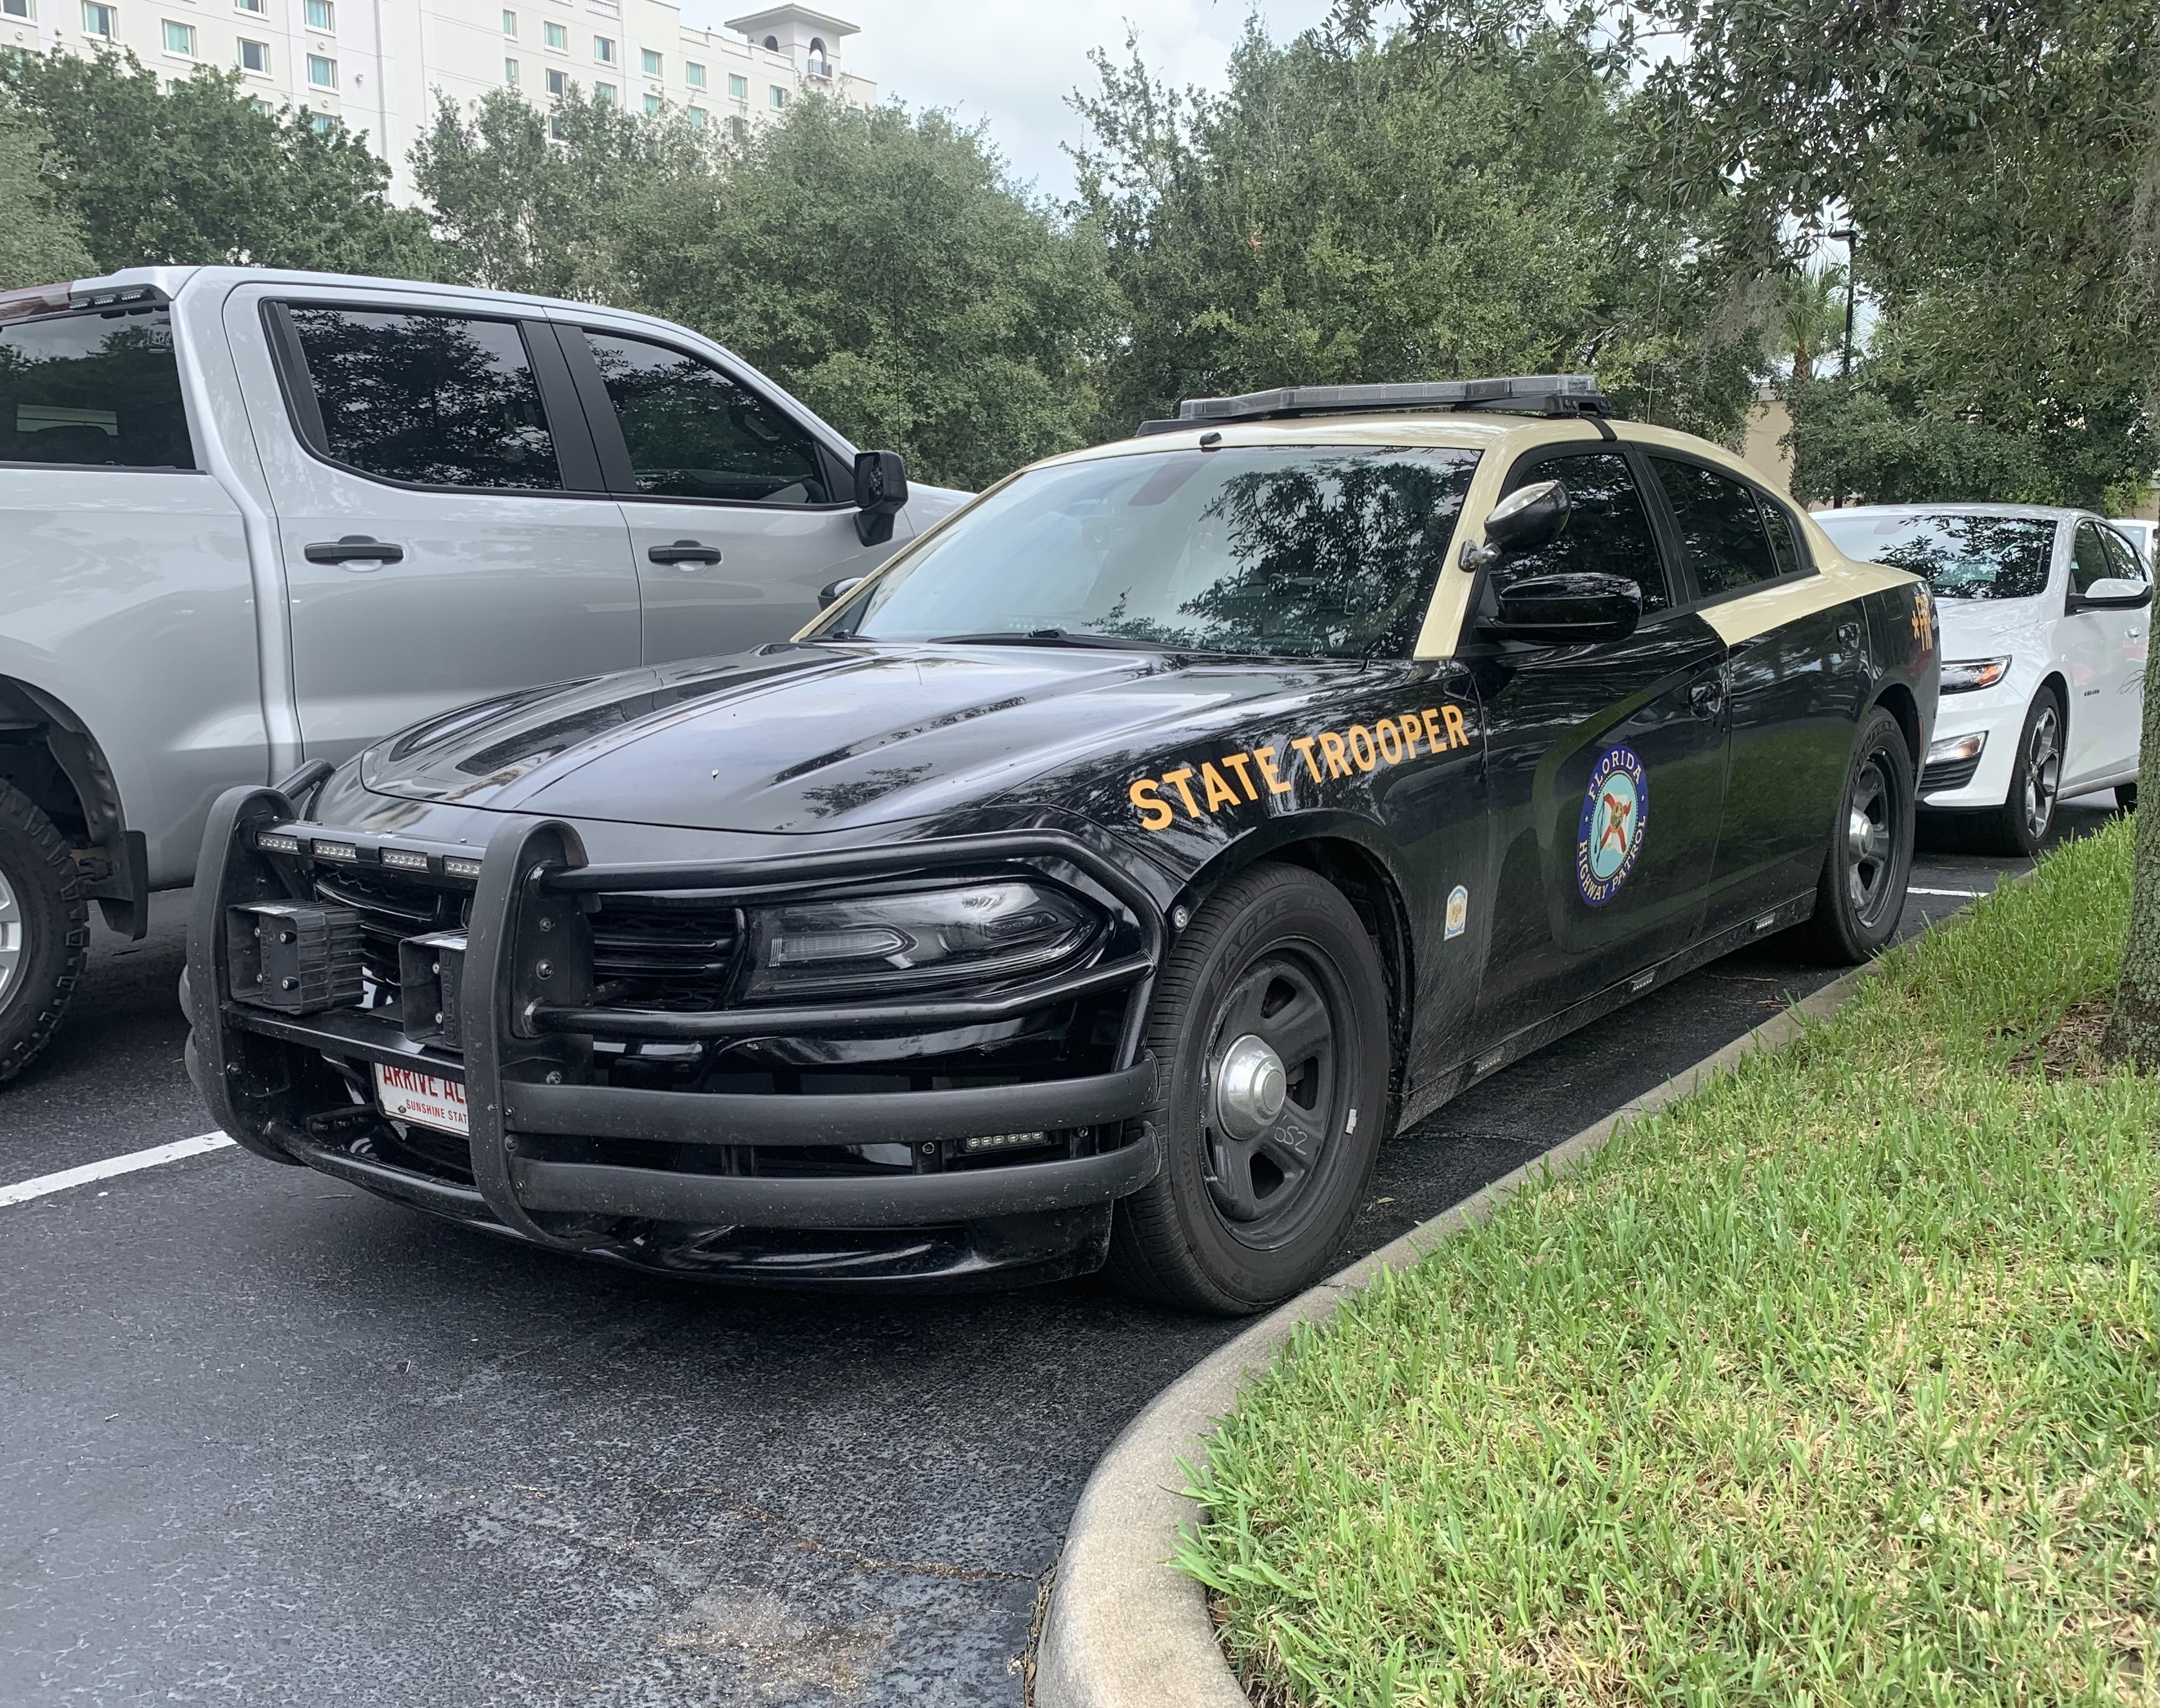 A photo  of Florida Highway Patrol
            Cruiser 0161, a 2015-2019 Dodge Charger             taken by Dan Gederman